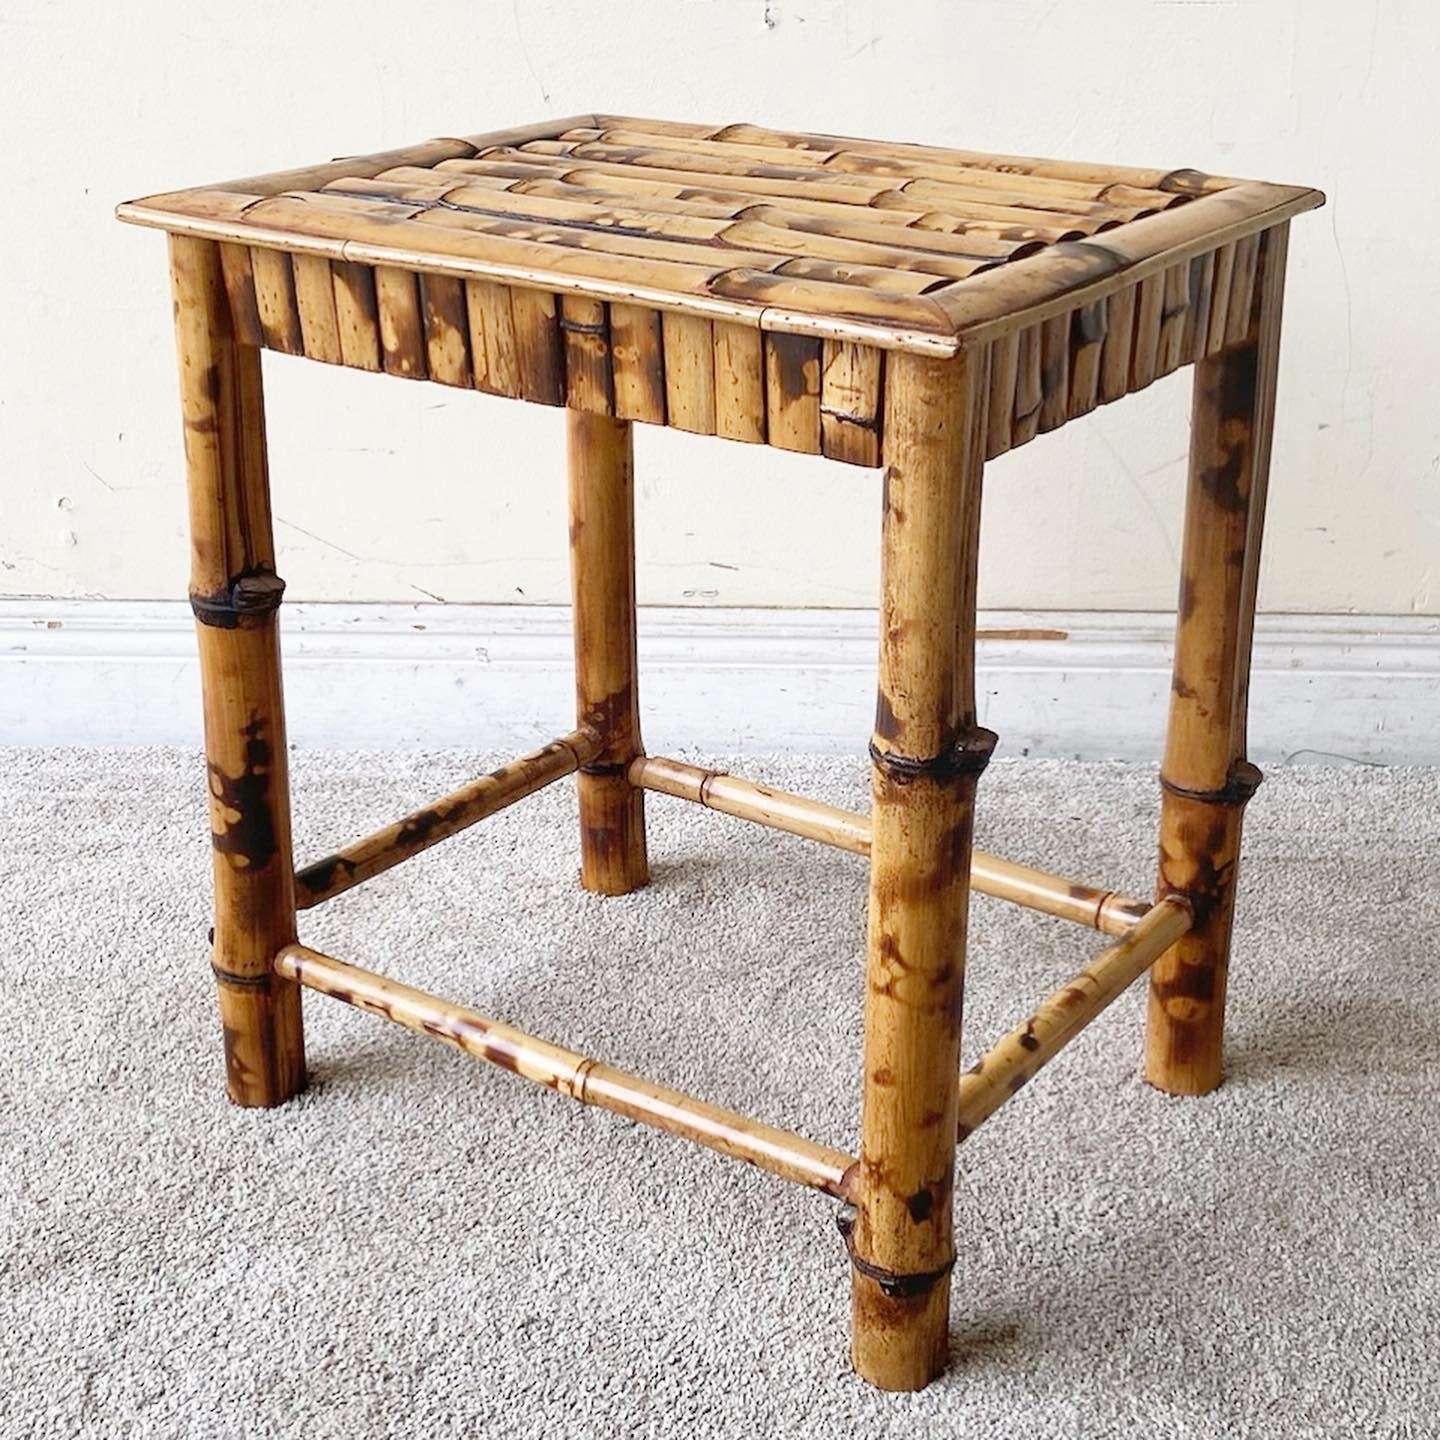 Exceptional vintage bohemian site table. Features a tortoise shell bamboo construction.